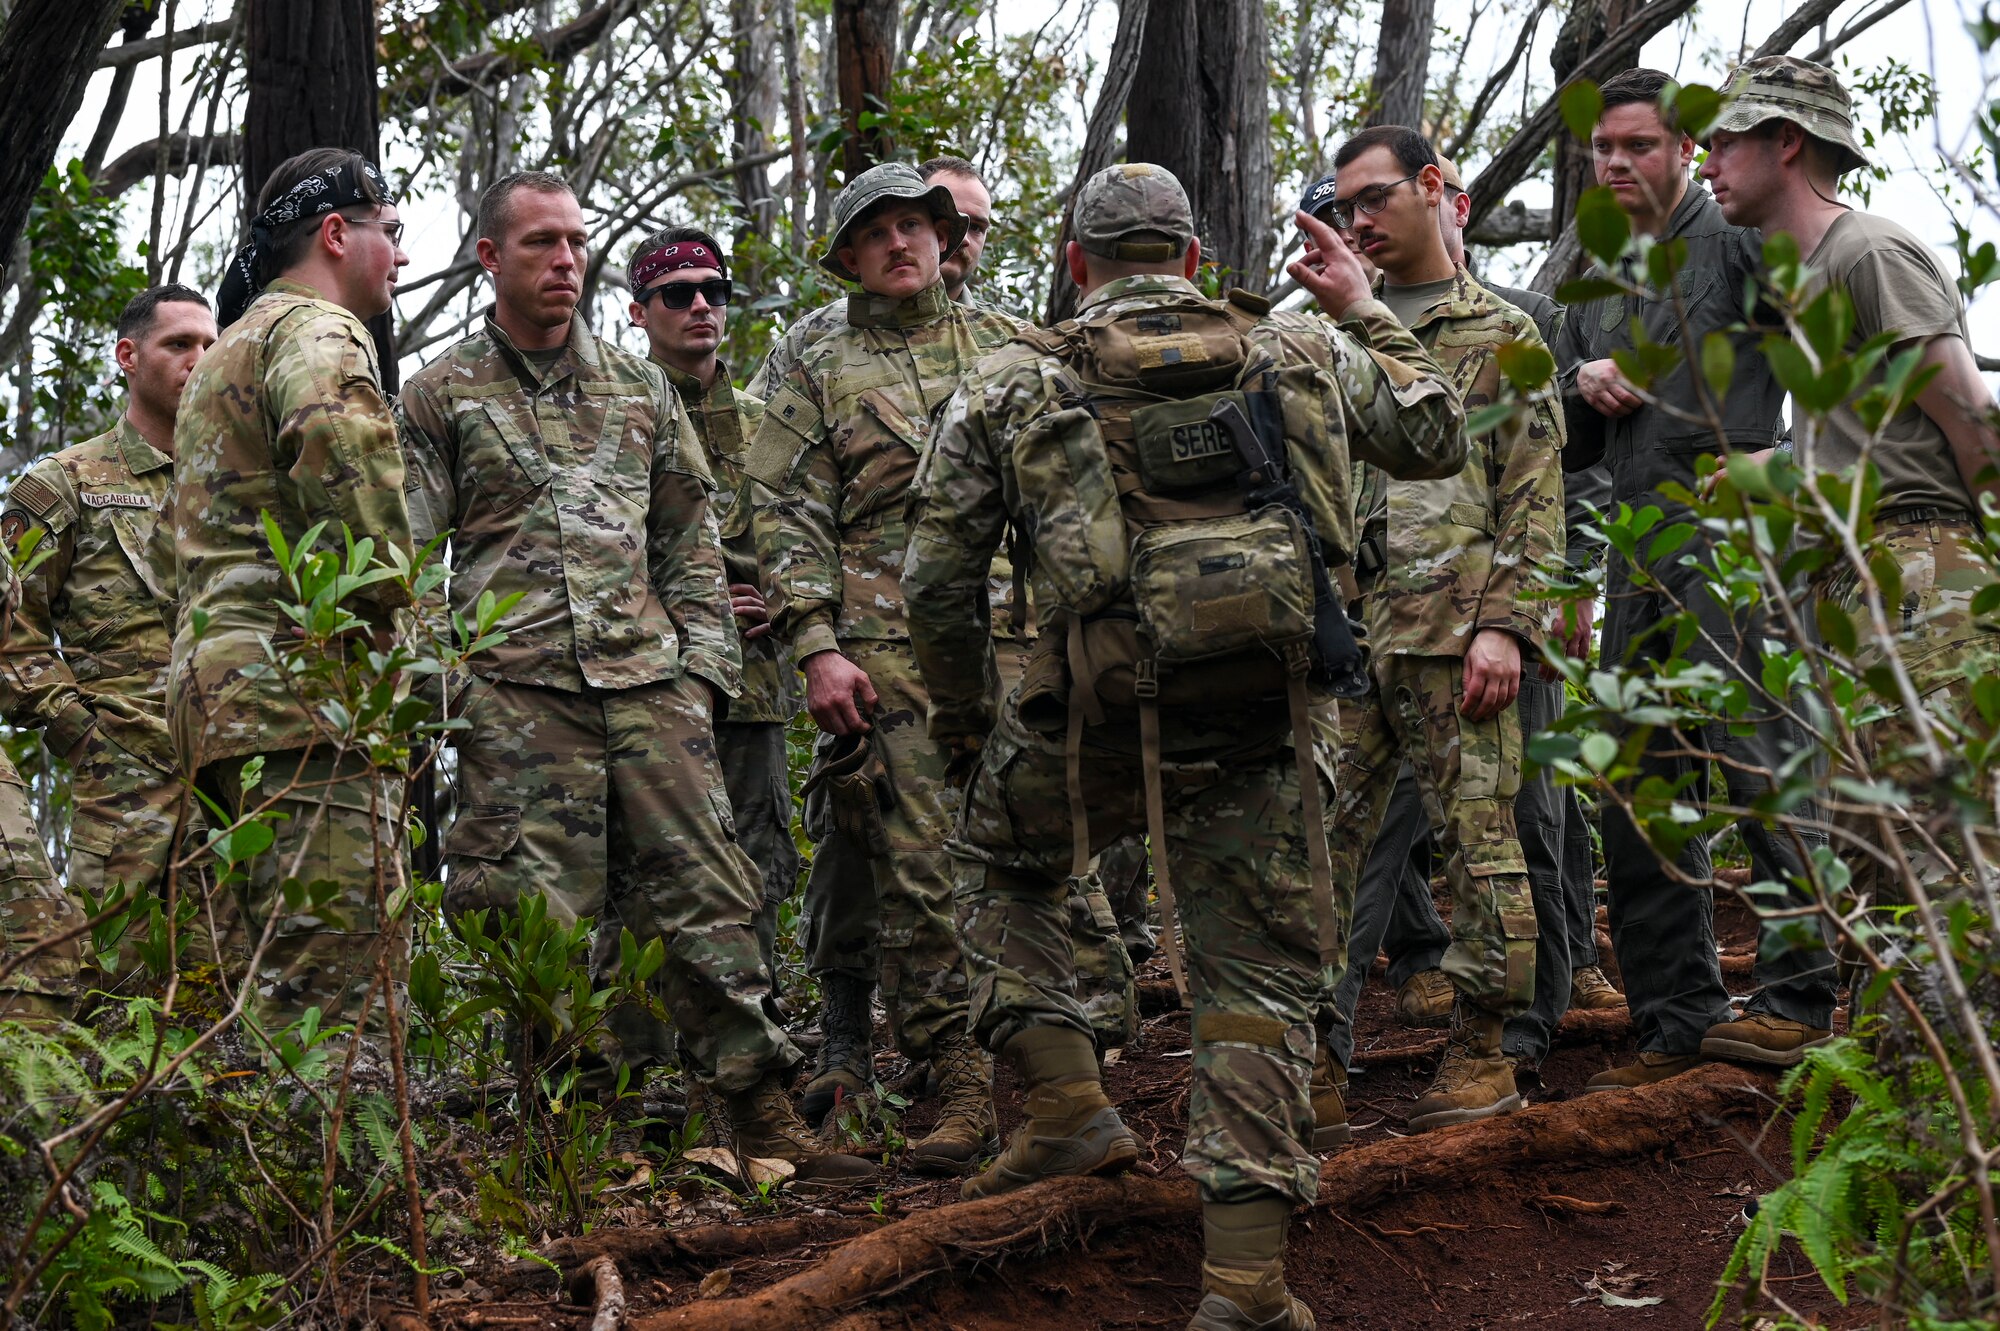 U.S. Air Force members from Fairchild Air Force Base, Washington, are briefed on survival techniques in the jungle during a simulated isolation scenario near Bellows Air Force Station, Hawaii, Feb. 2, 2023. Members from Team Fairchild’s innovation cell conducted an event to review current foundational survival training methods and their applicability to tropic, jungle, and coastal conditions. (U.S. Air Force photo by Airman 1st Class Haiden Morris)